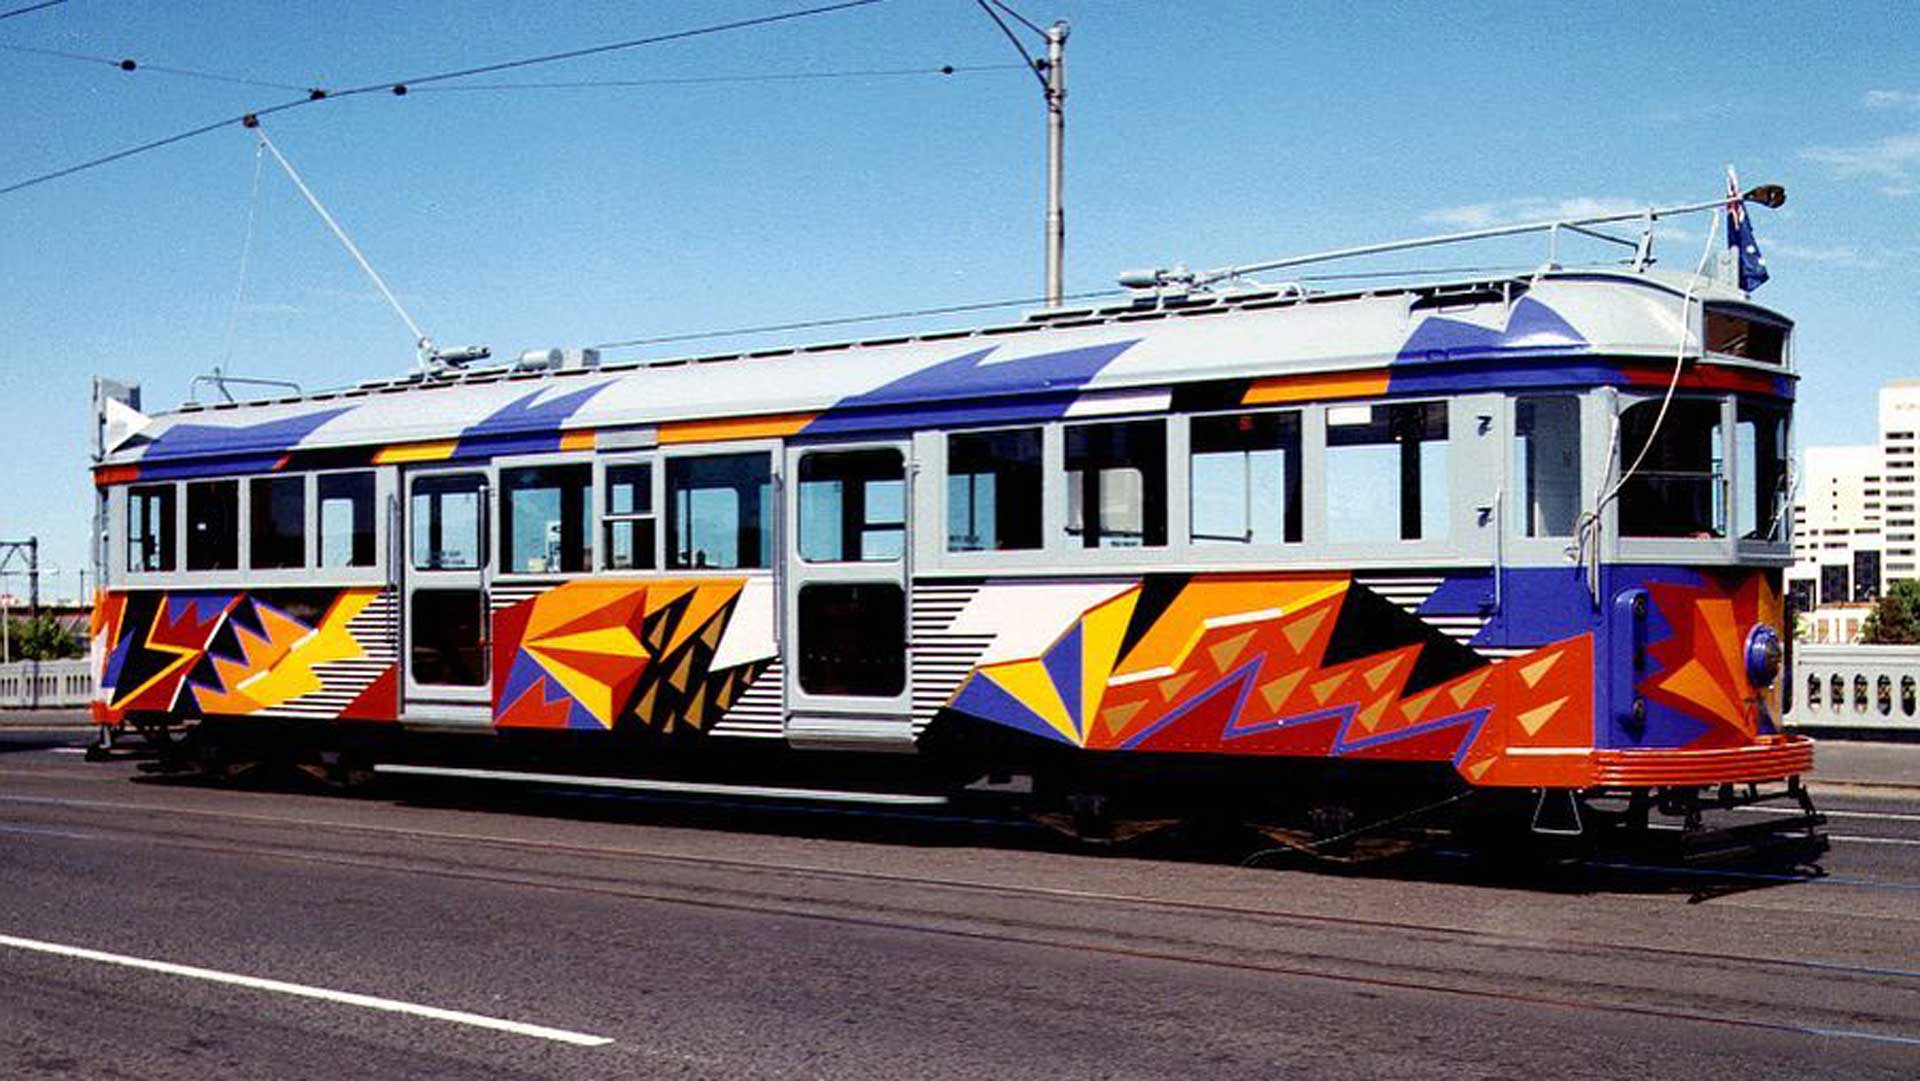 The Colourful Designs for Melbourne's 2019 Art Trams Have Just Been Unveiled